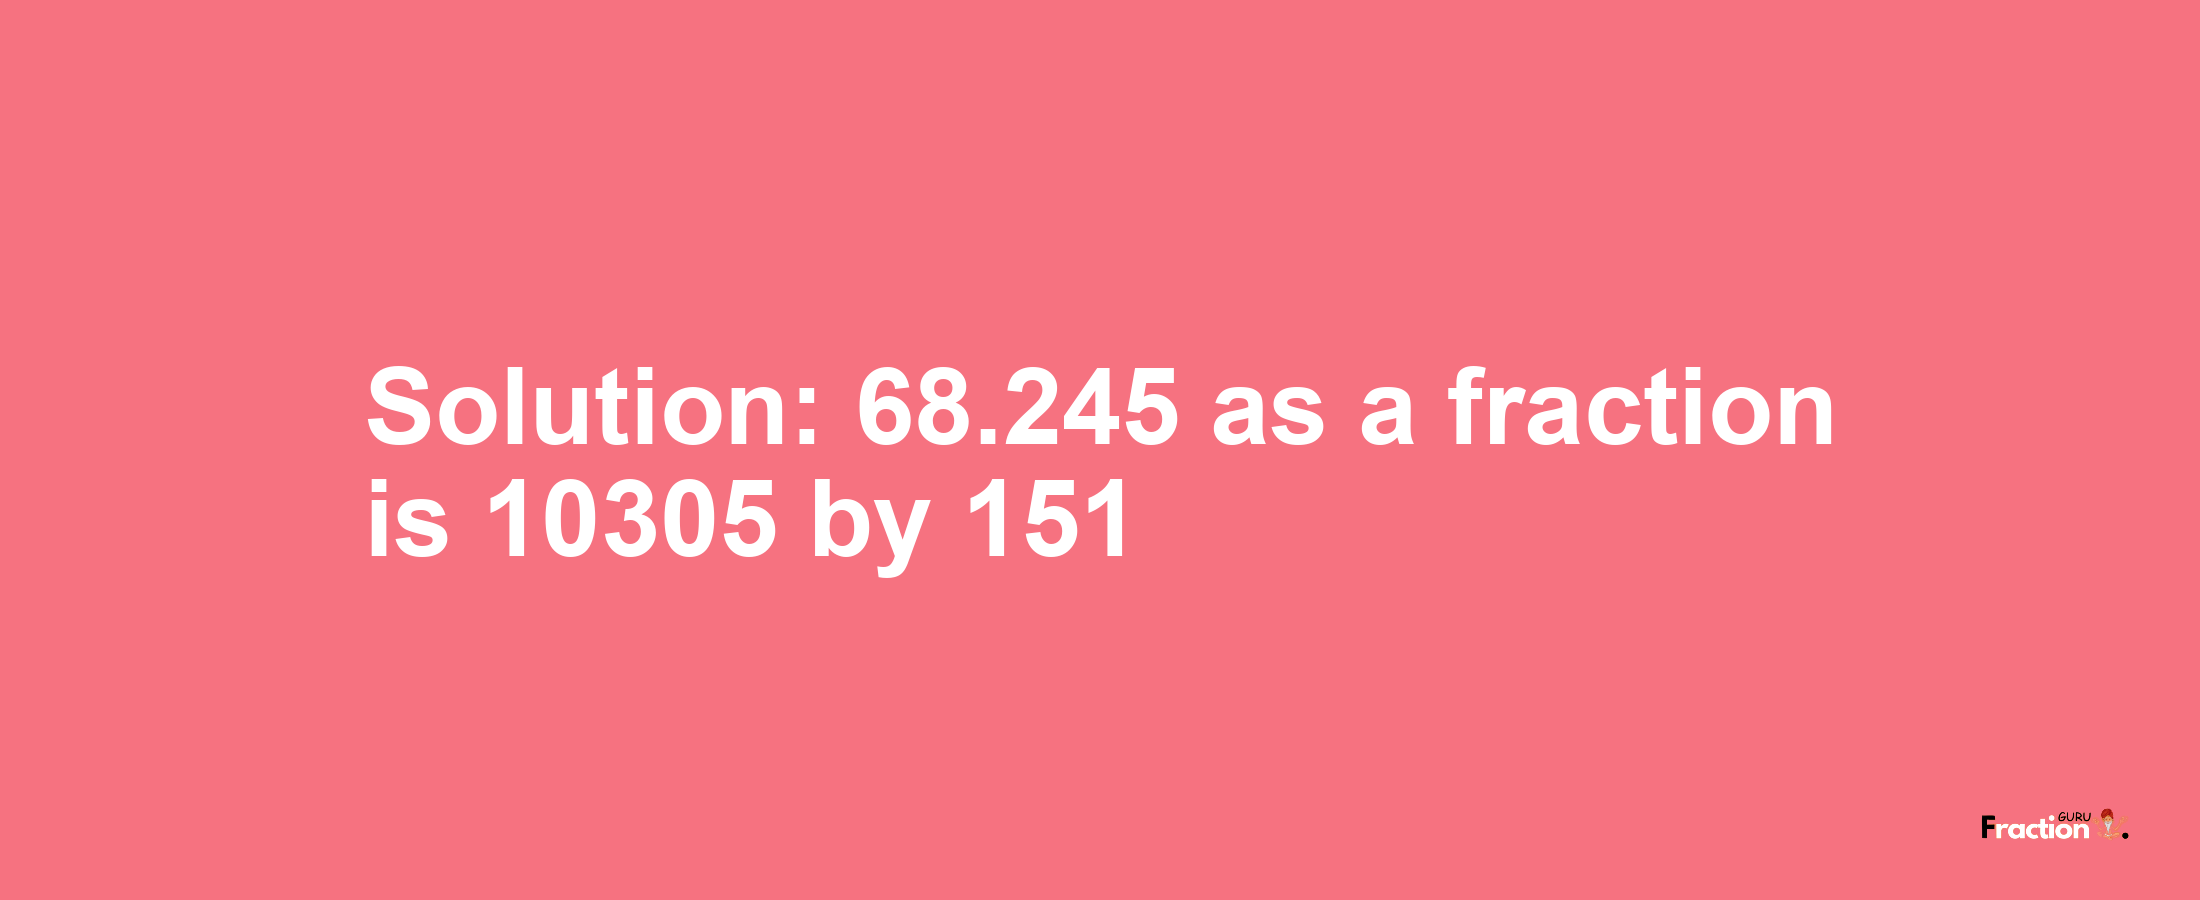 Solution:68.245 as a fraction is 10305/151